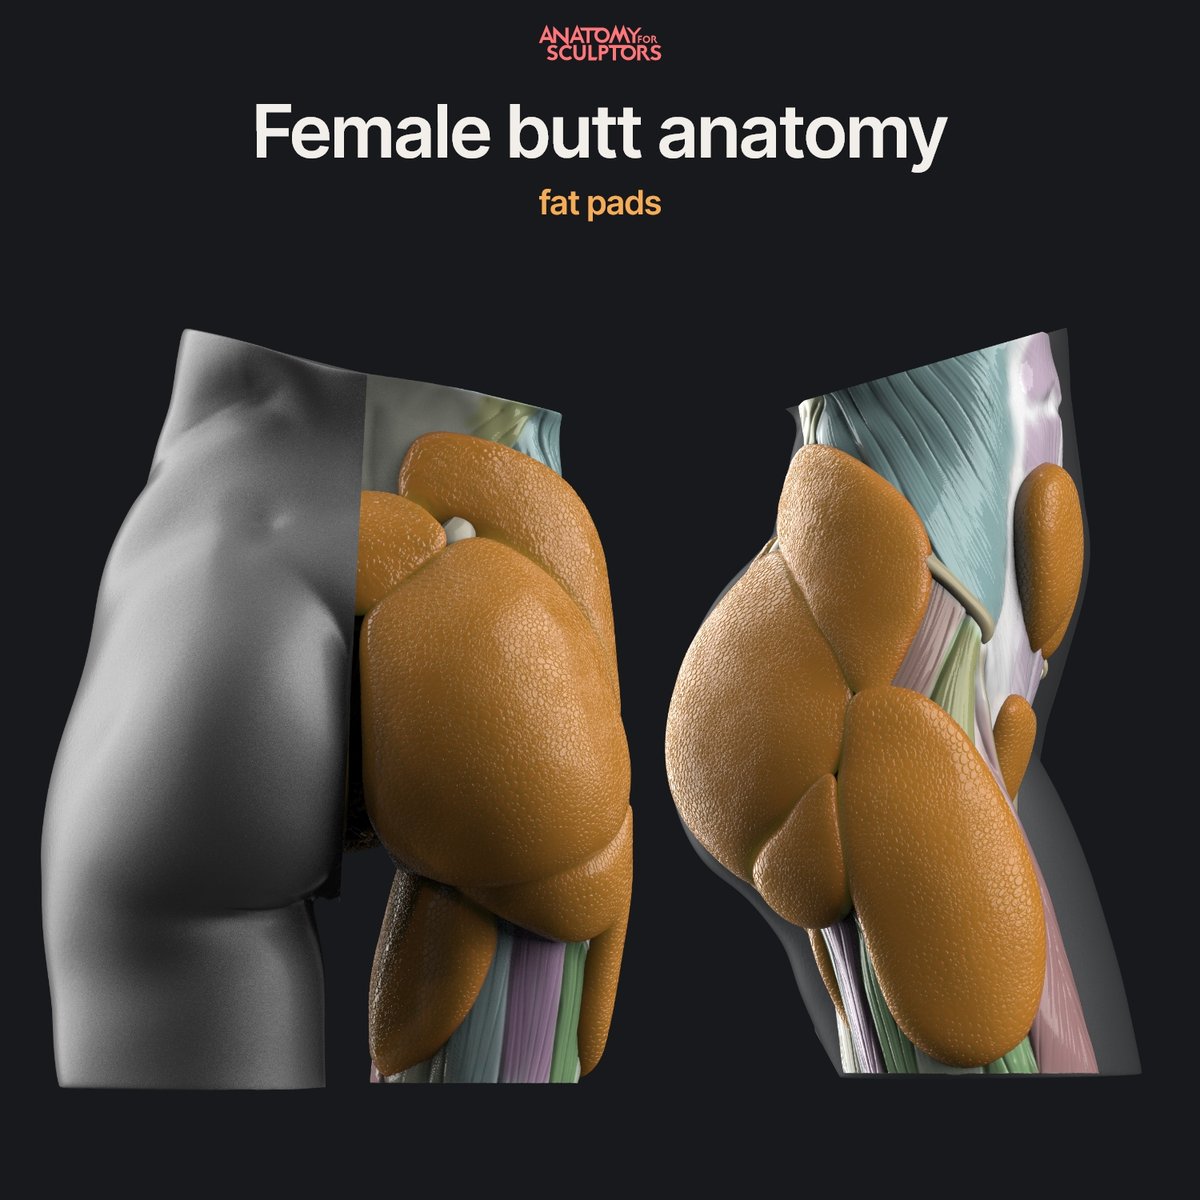 Anatomy For Sculptors on X: Fat, not muscle, makes female hips